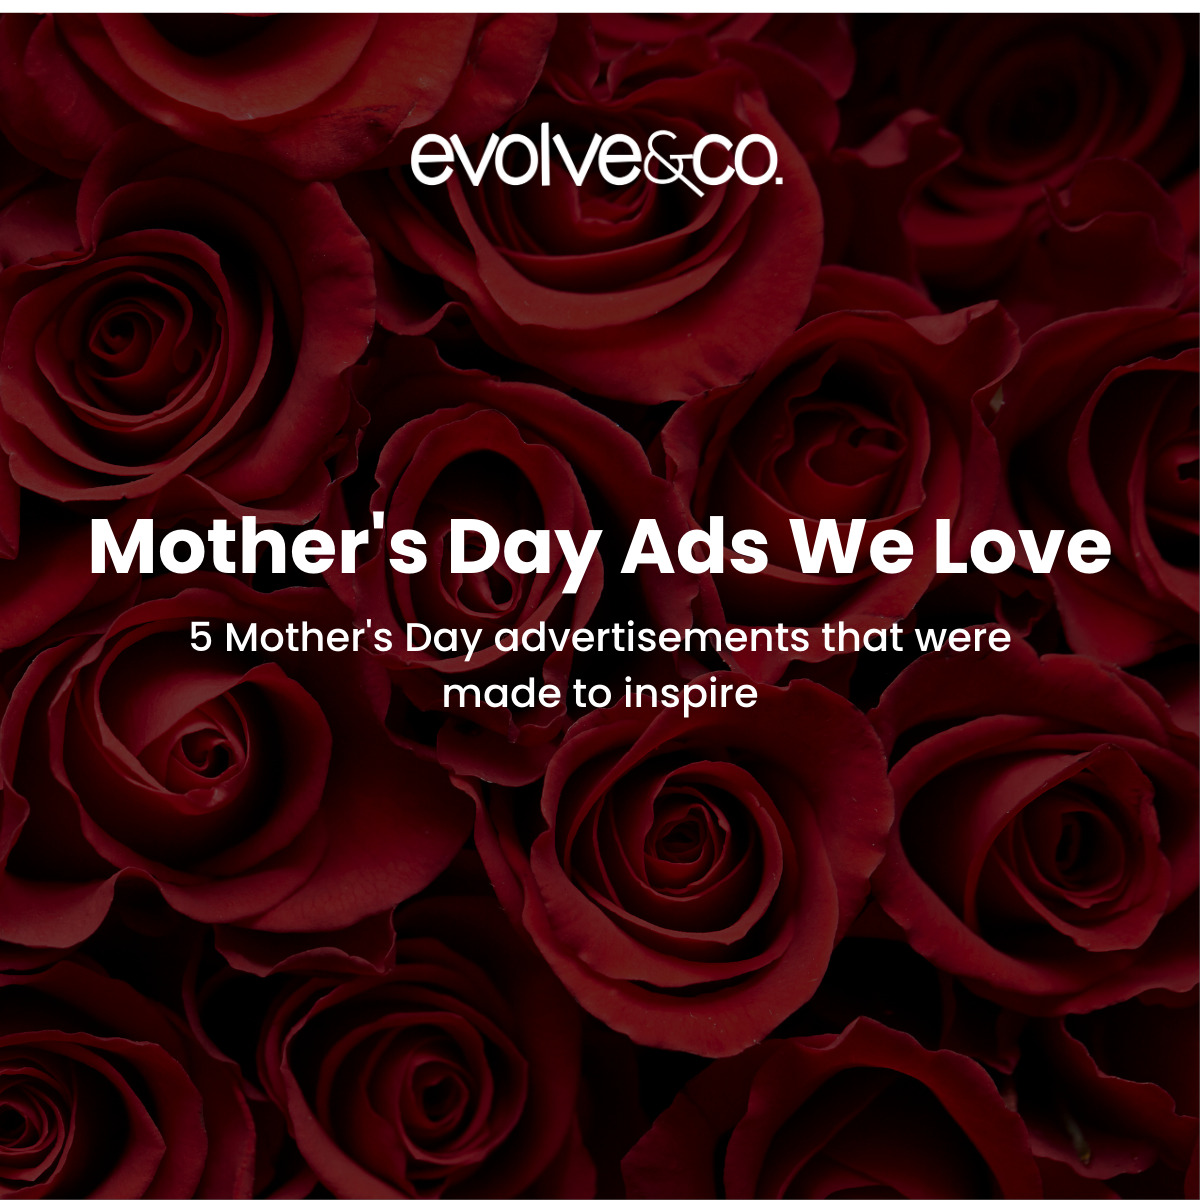 Mother’s Day Ads We Love